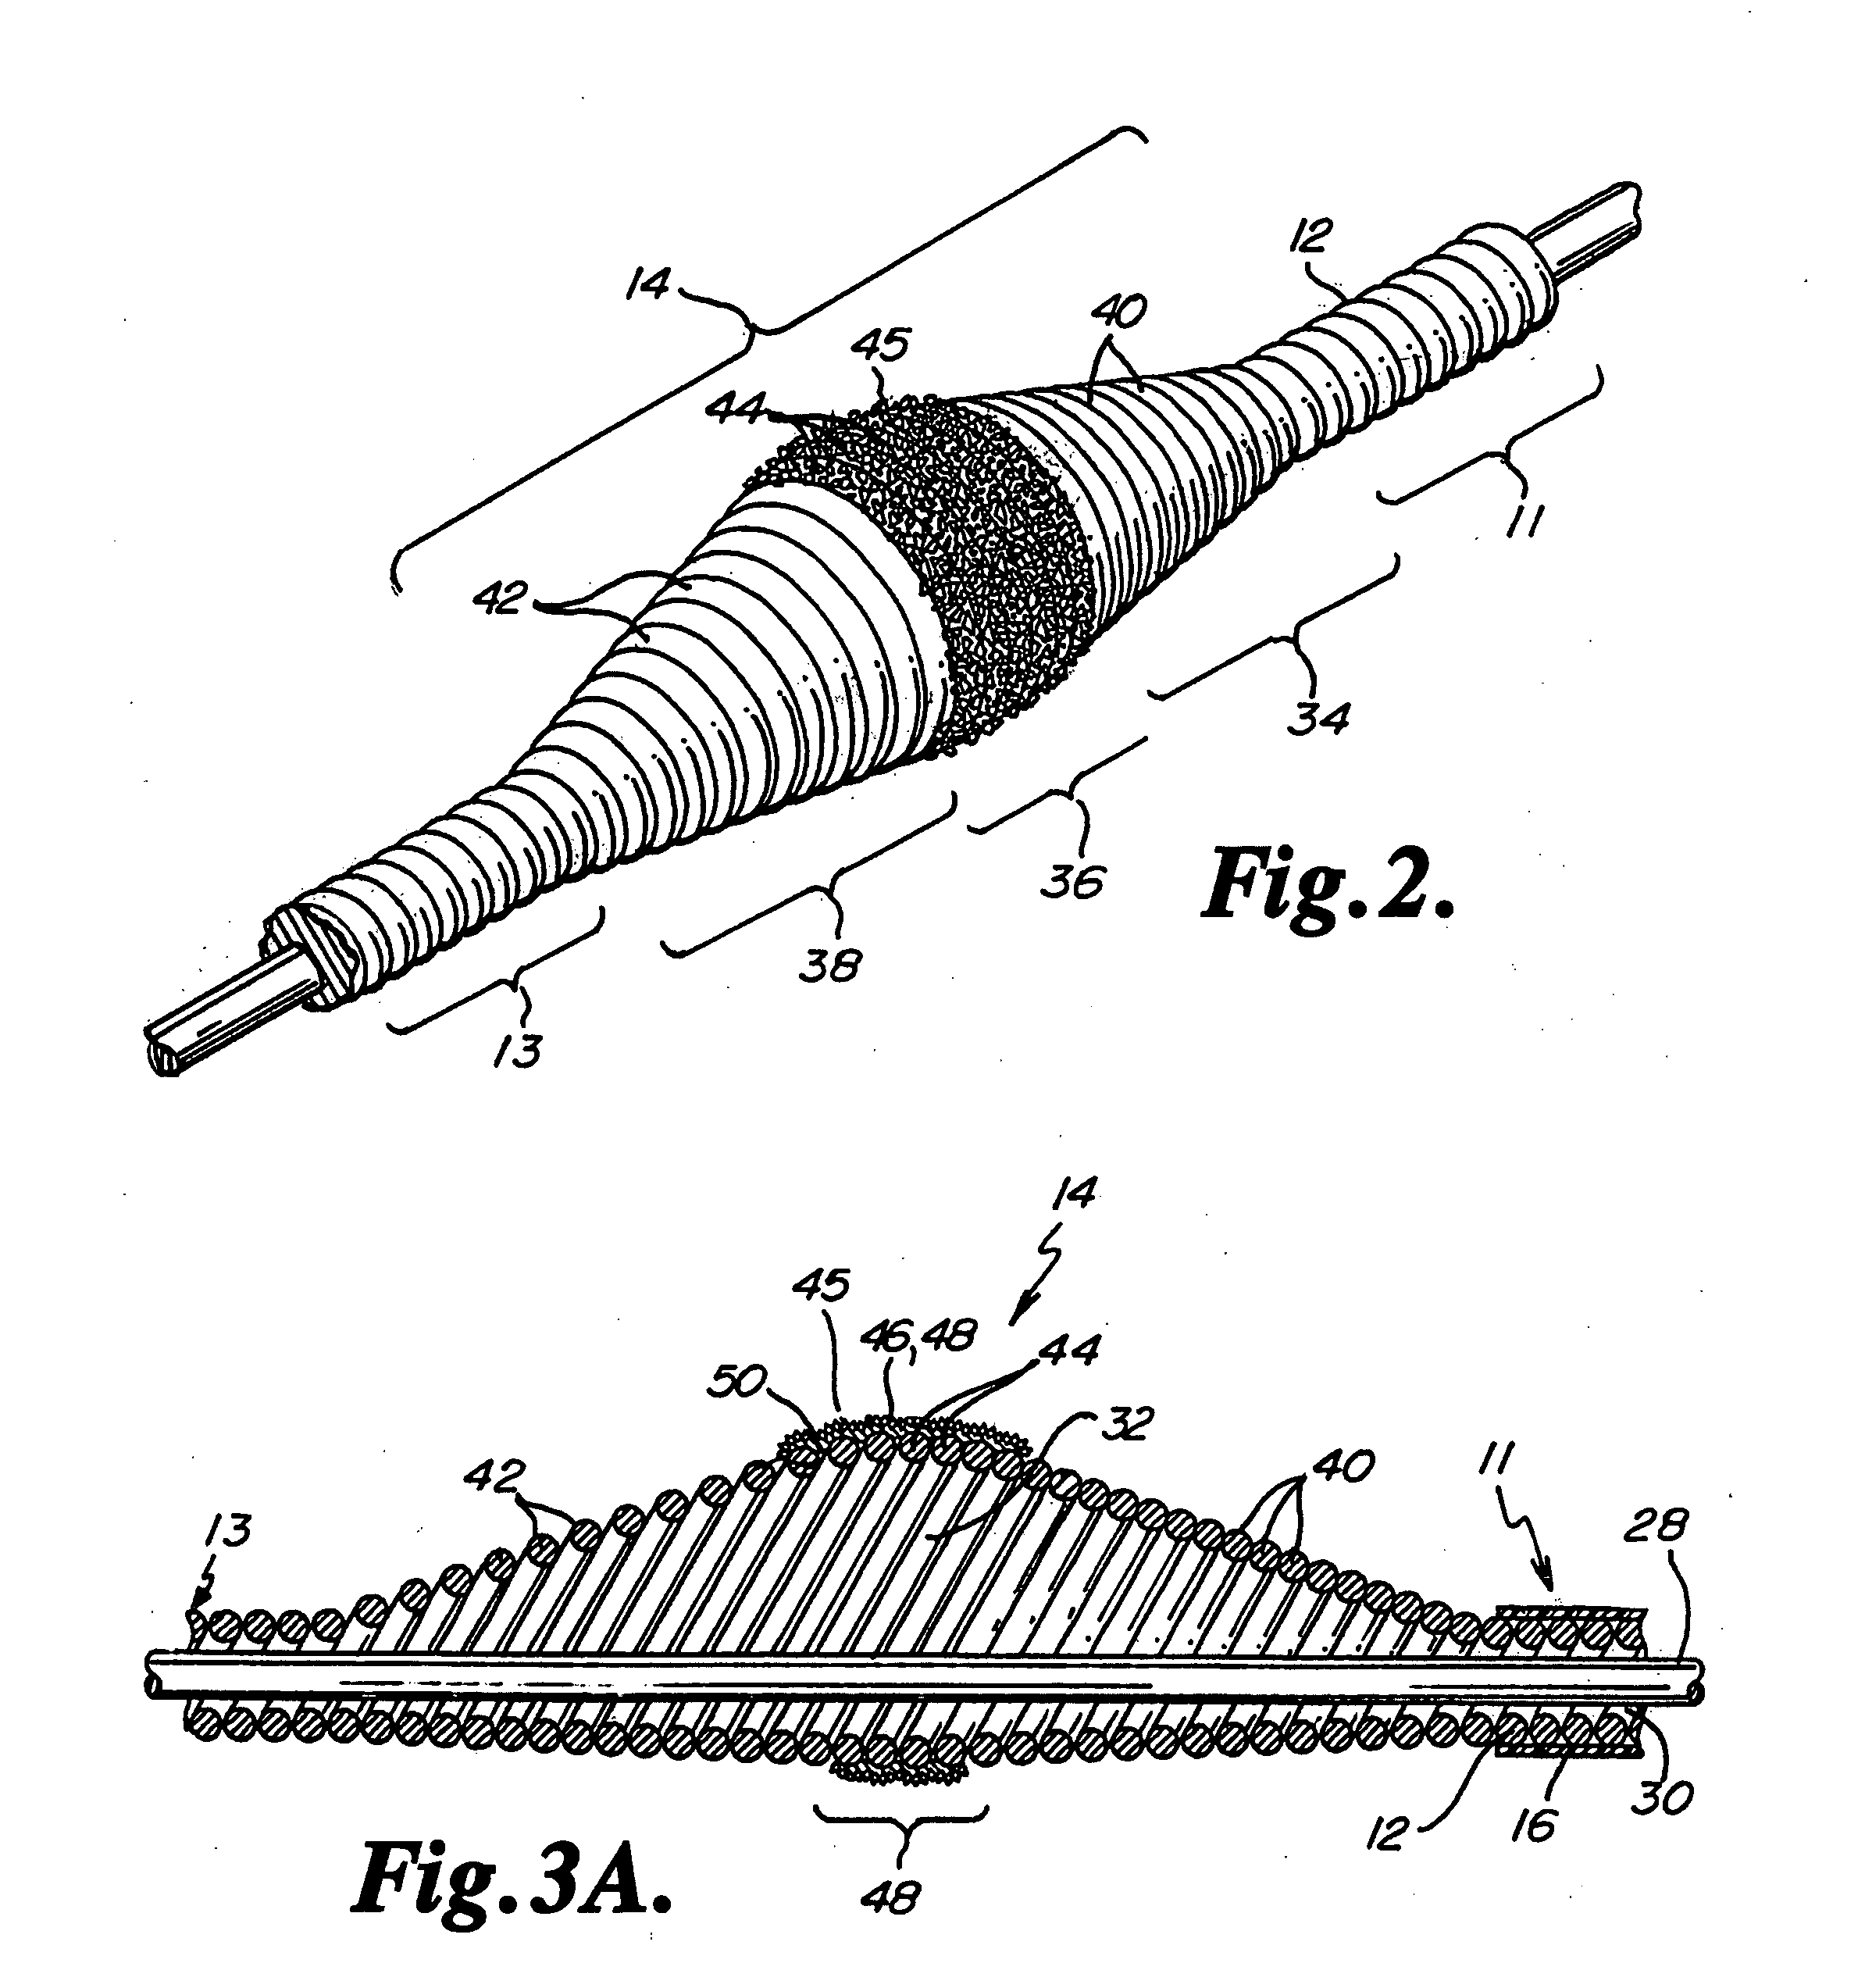 Terminal guide for rotational atherectomy device and method of using same